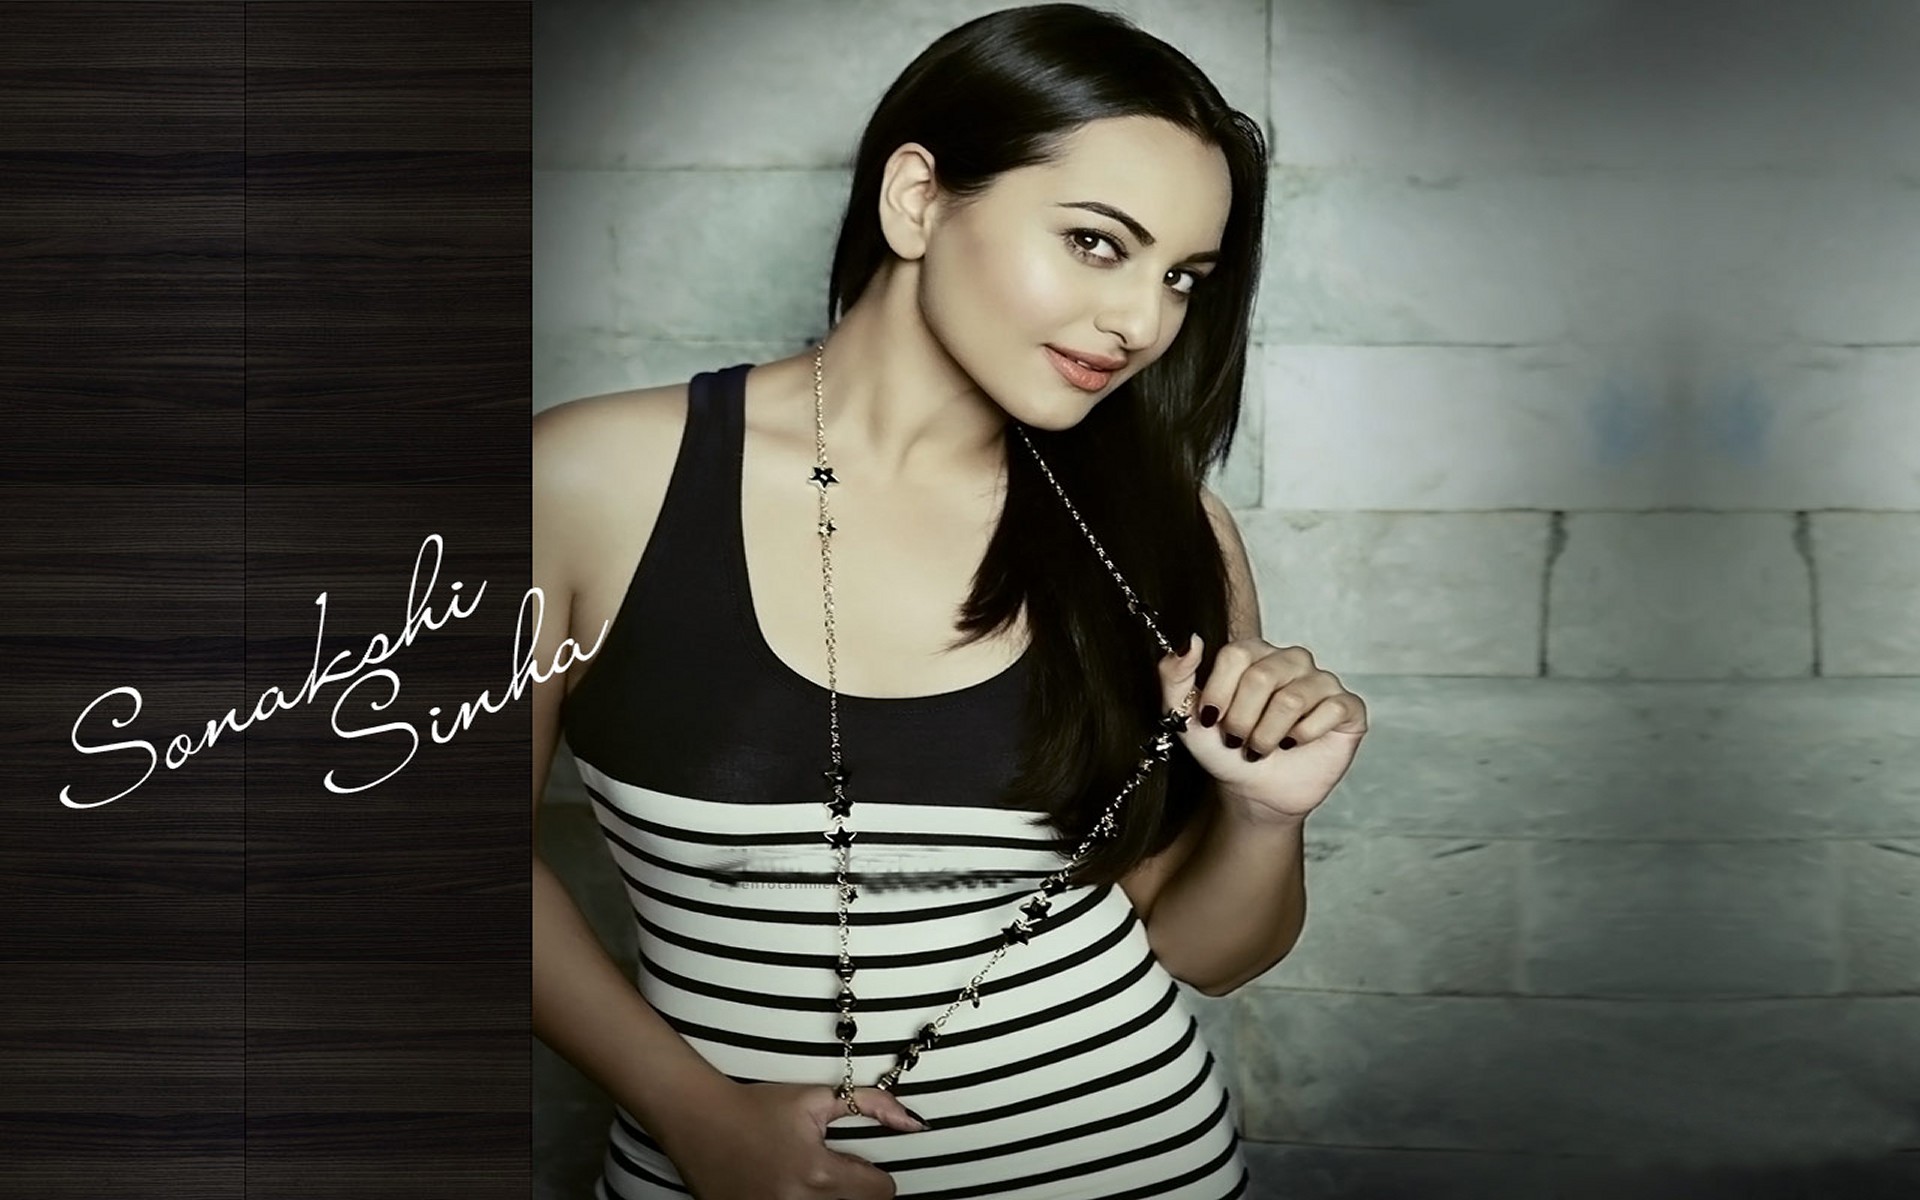 sonakshi sinha full size images - Only HD Wallpapers